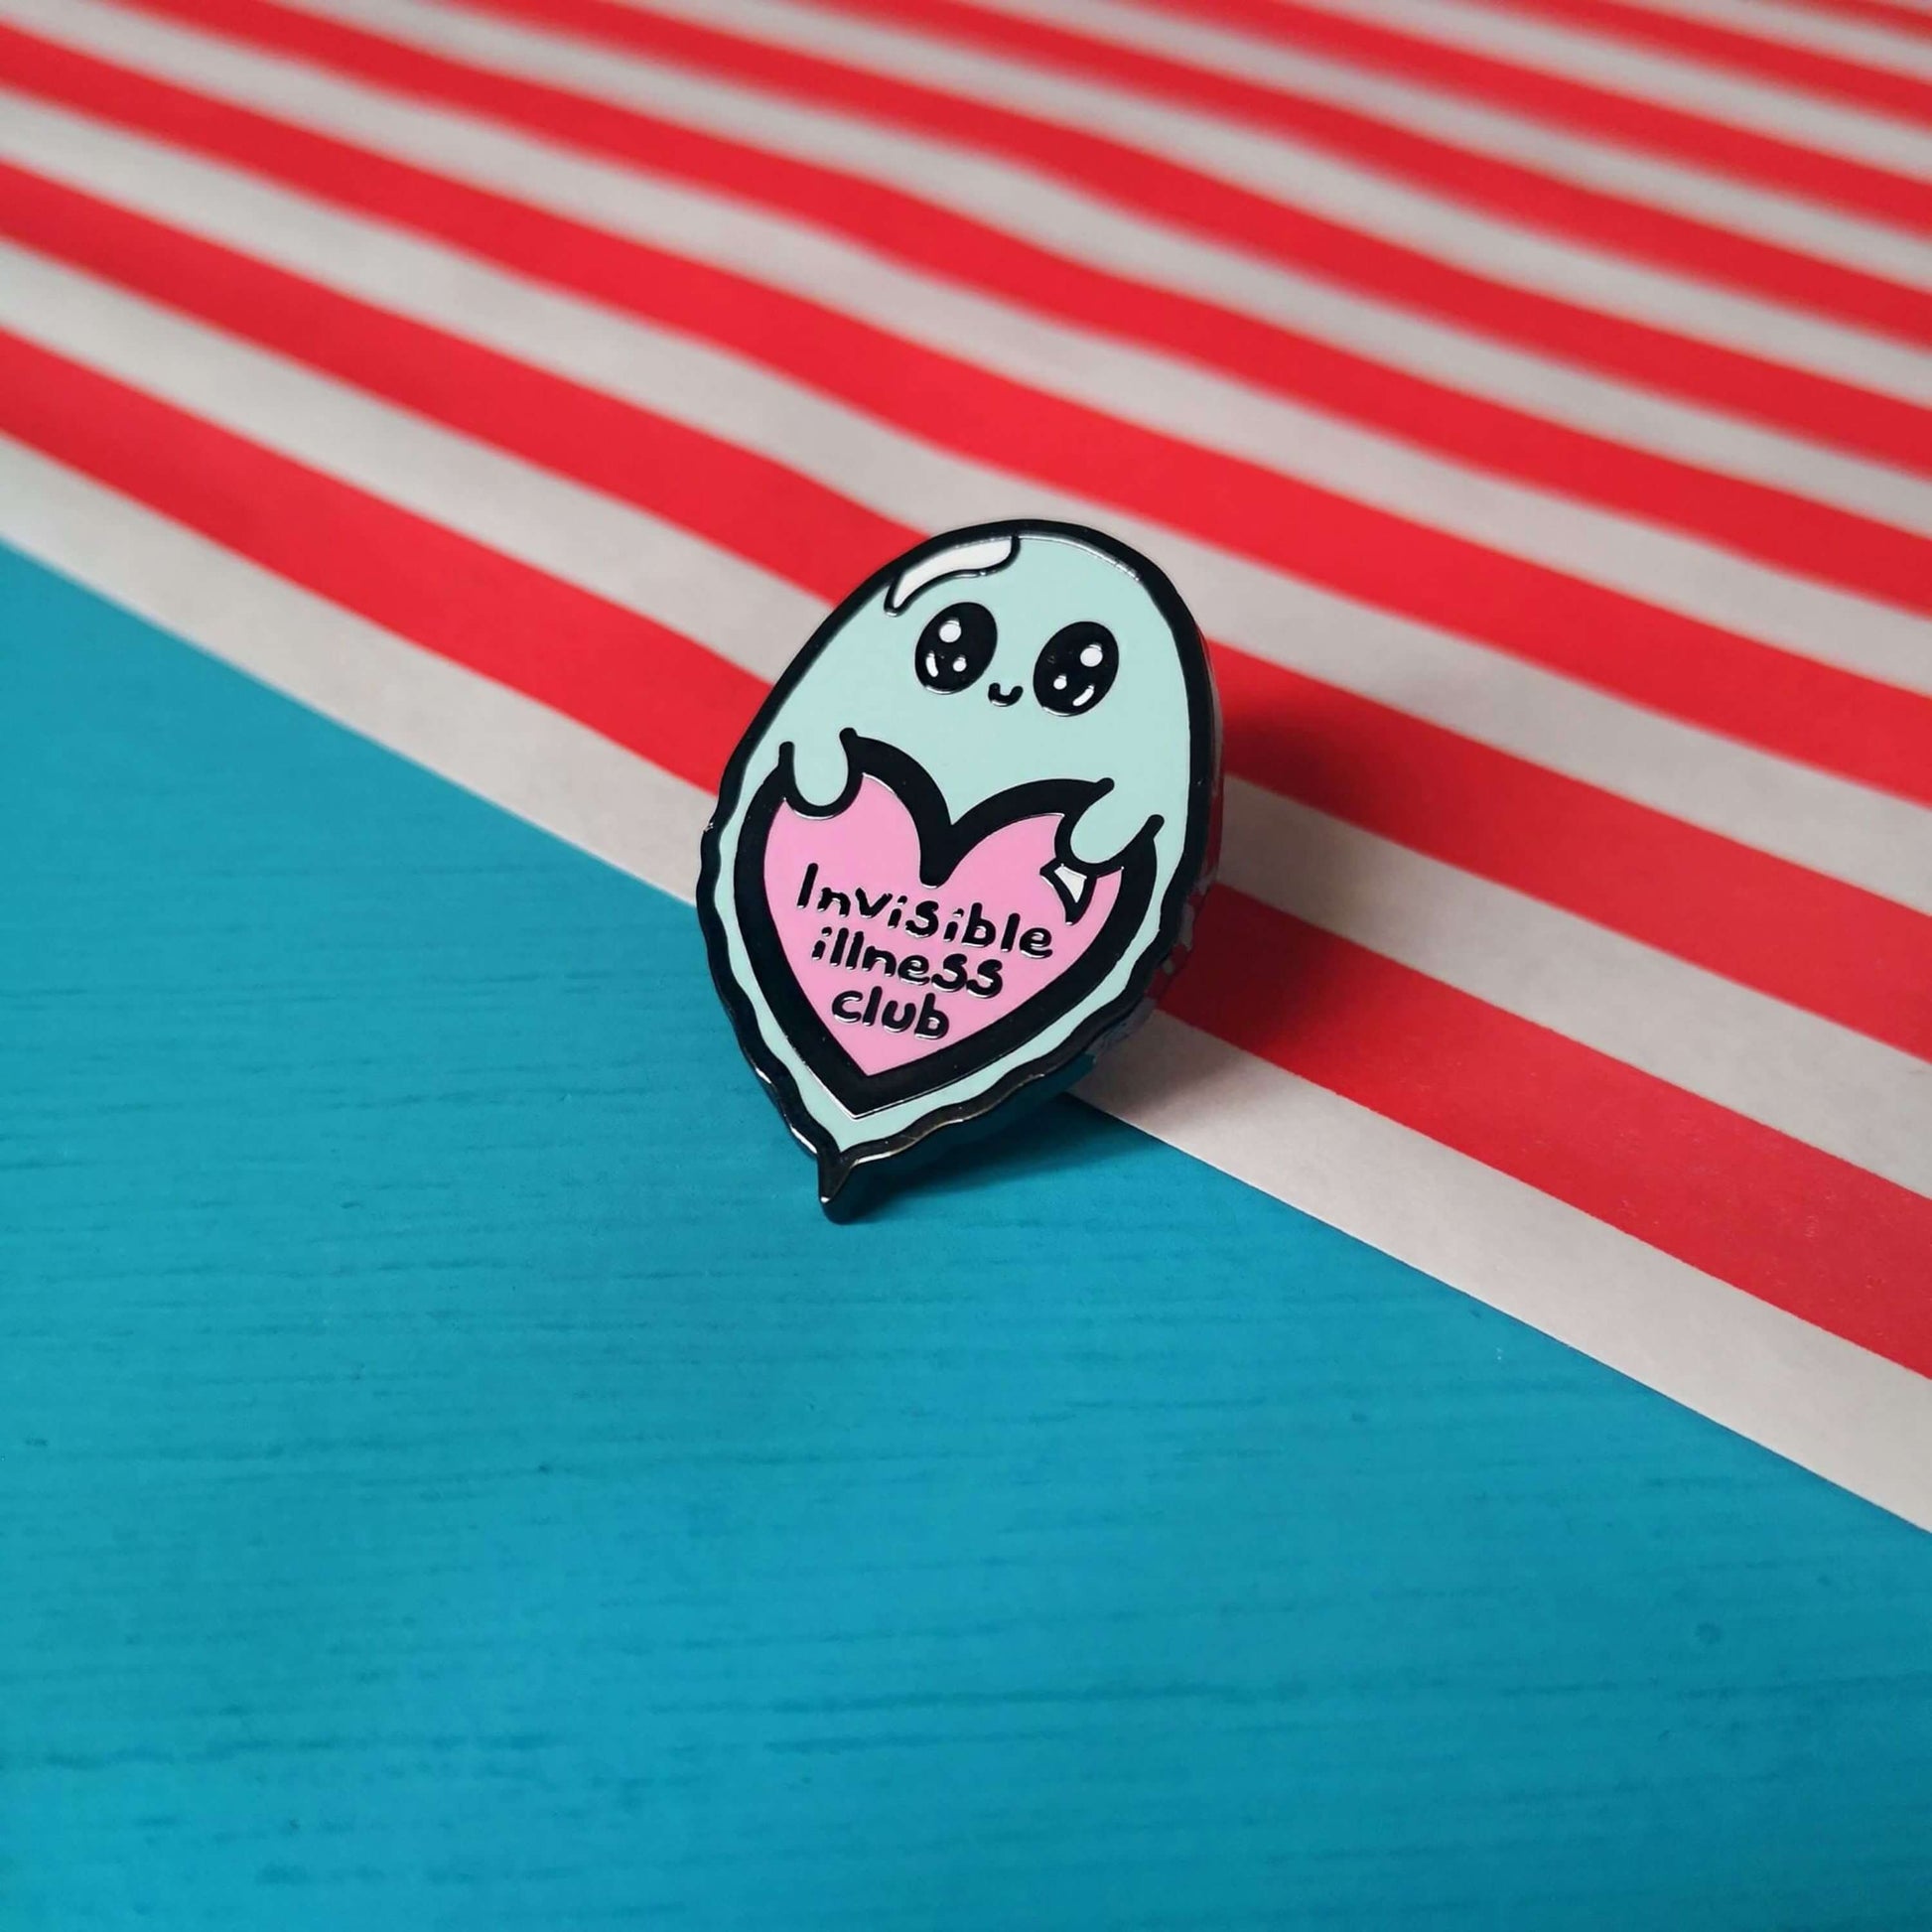 Invisible Illness Club Enamel Pin shown on a red and white striped paper bag on a blue background. The enamel pin is of a cute smiling ghost holding a pink heart with text saying invisible illness club. The enamel pin is designed to raise awareness for hidden and chronic illnesses